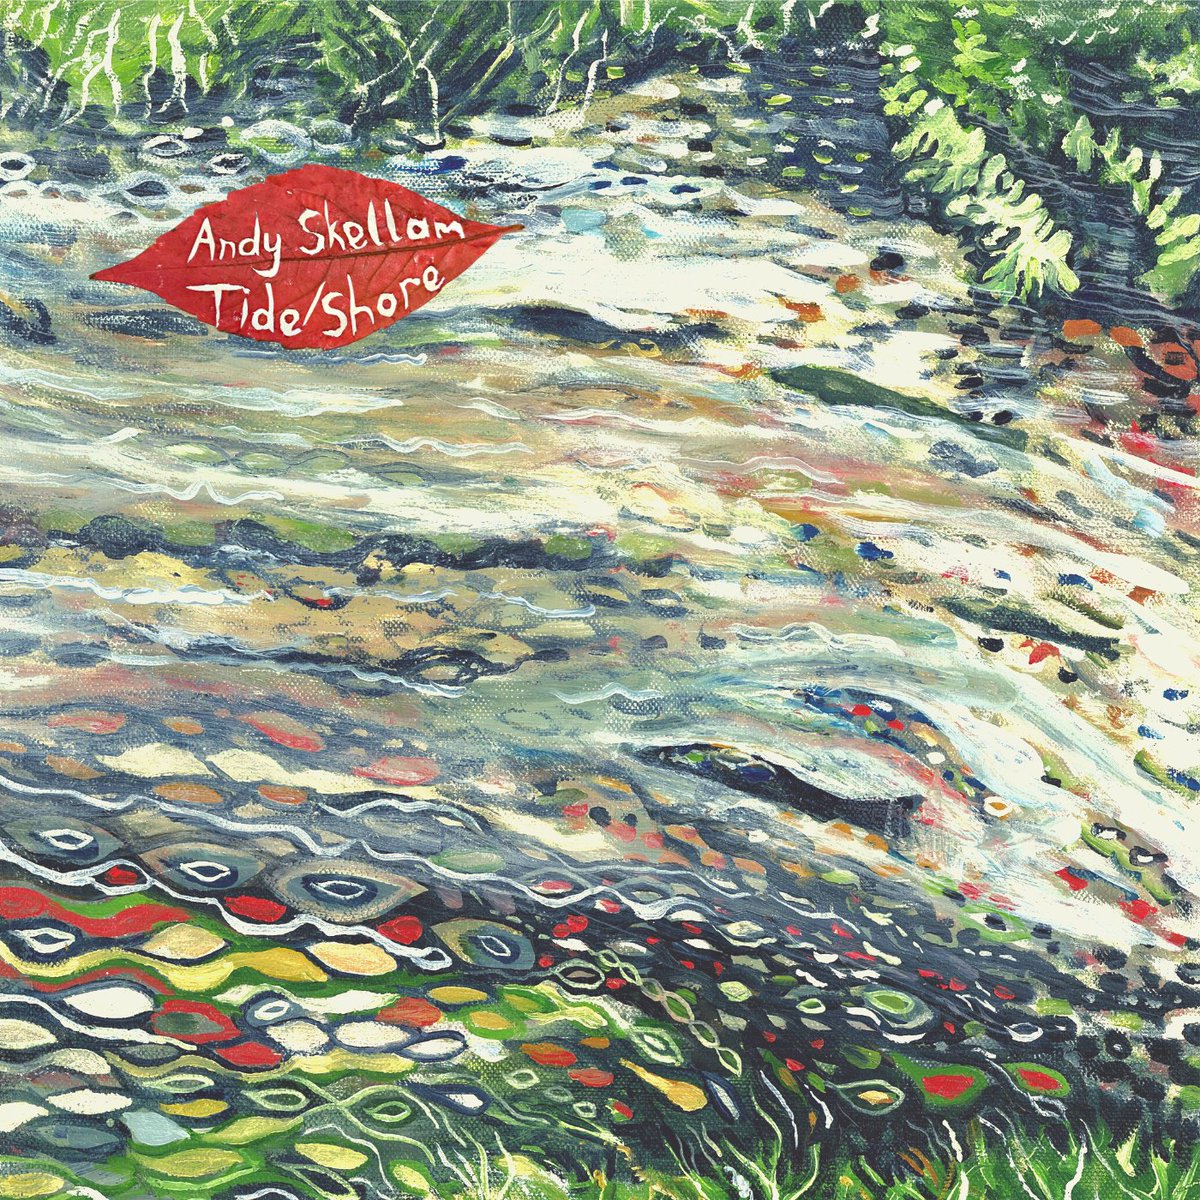 This Friday @AndySkellam is releasing his gorgeous EP! Pre-order it at pearolegs.com/shop/p/andy-sk… Come see him on the 3rd at @cafekinobristol in Bristol or on the 4th at @TheHarrisonFolk in London pearolegs.com/events #folkmusic #Tide #shore #Watercolour #flowing #stream